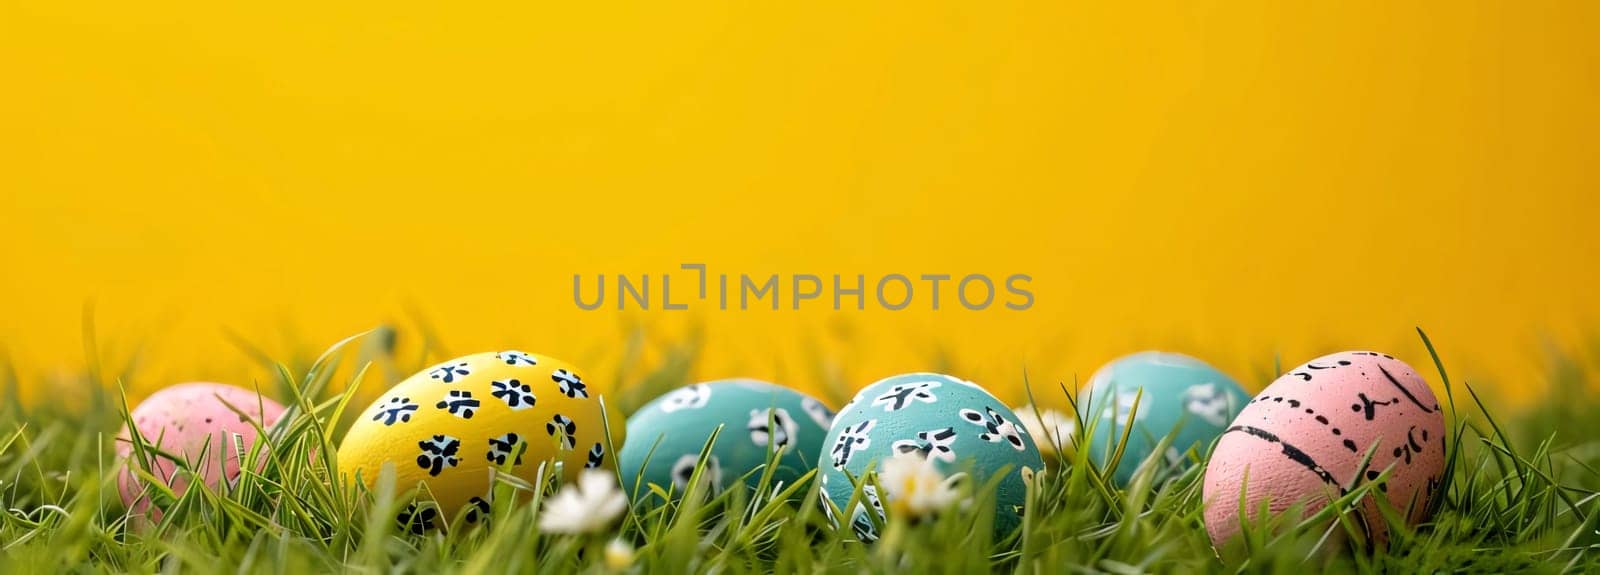 Feasts of the Lord's Resurrection: Easter eggs on green grass and yellow background with copy space.